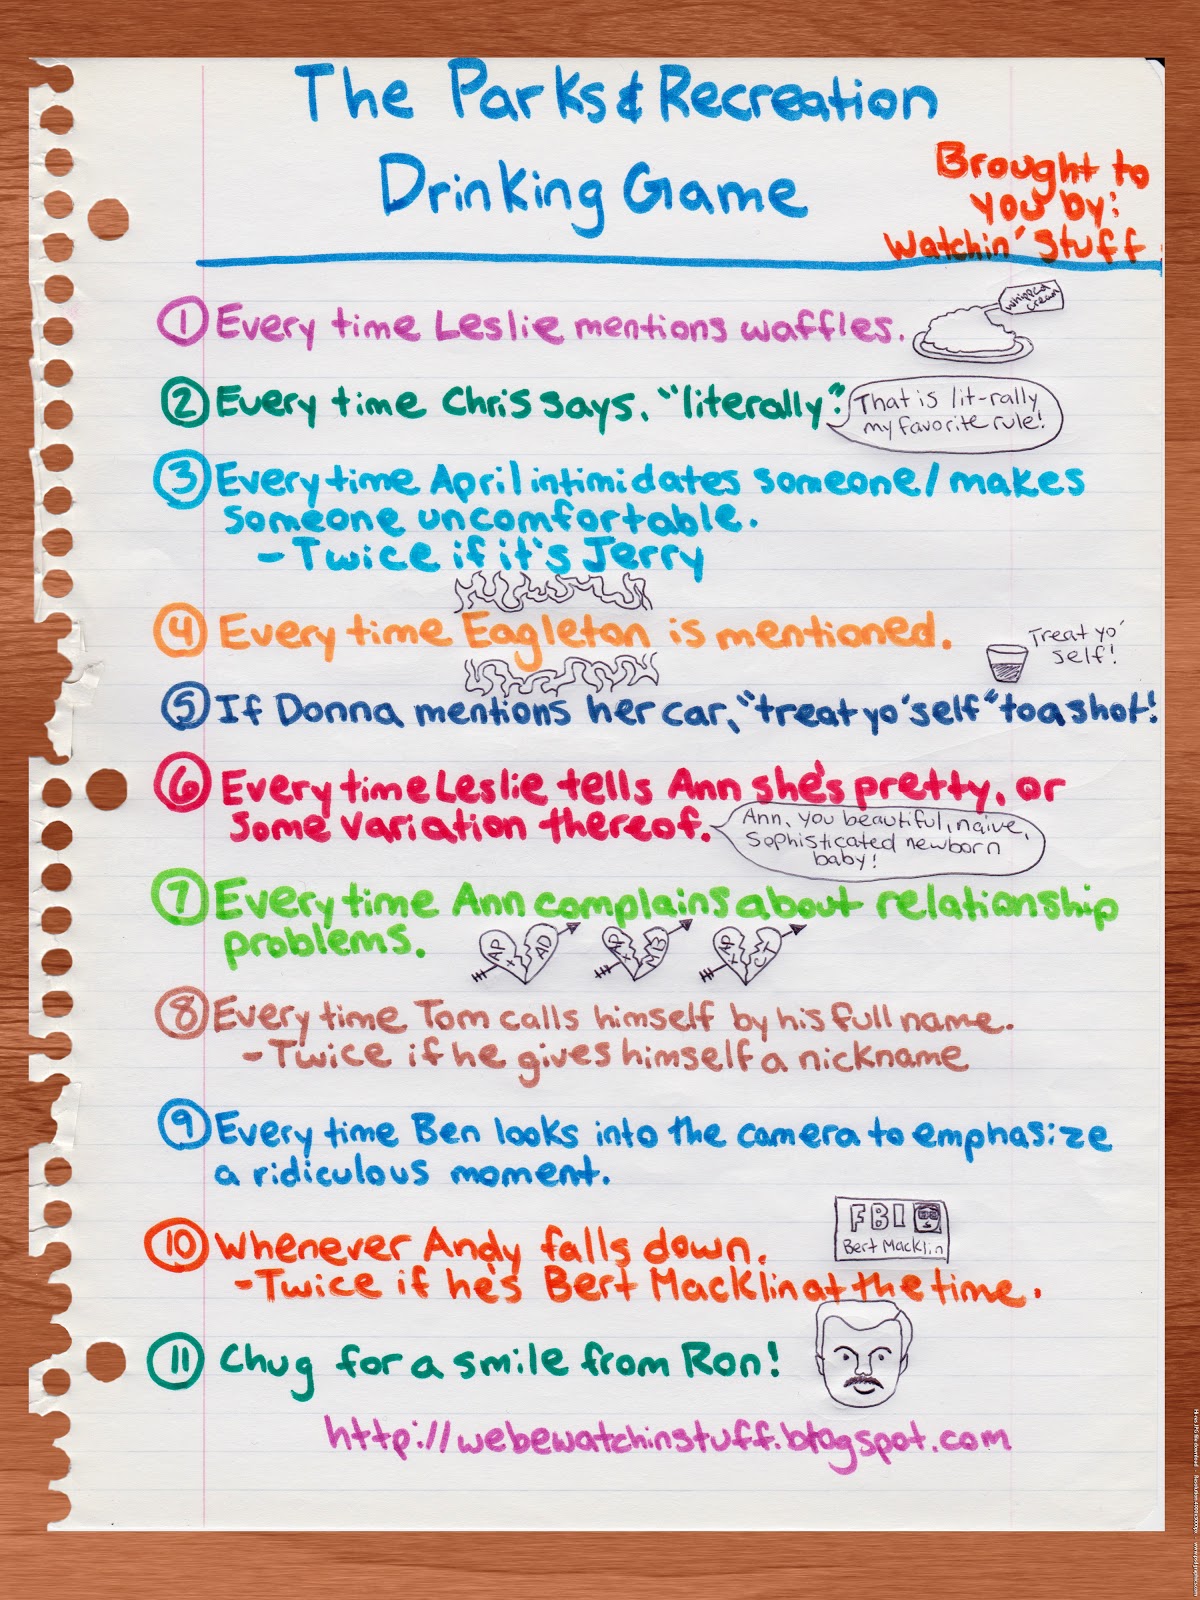 Watchin' Stuff: The Parks and Recreation Drinking Game